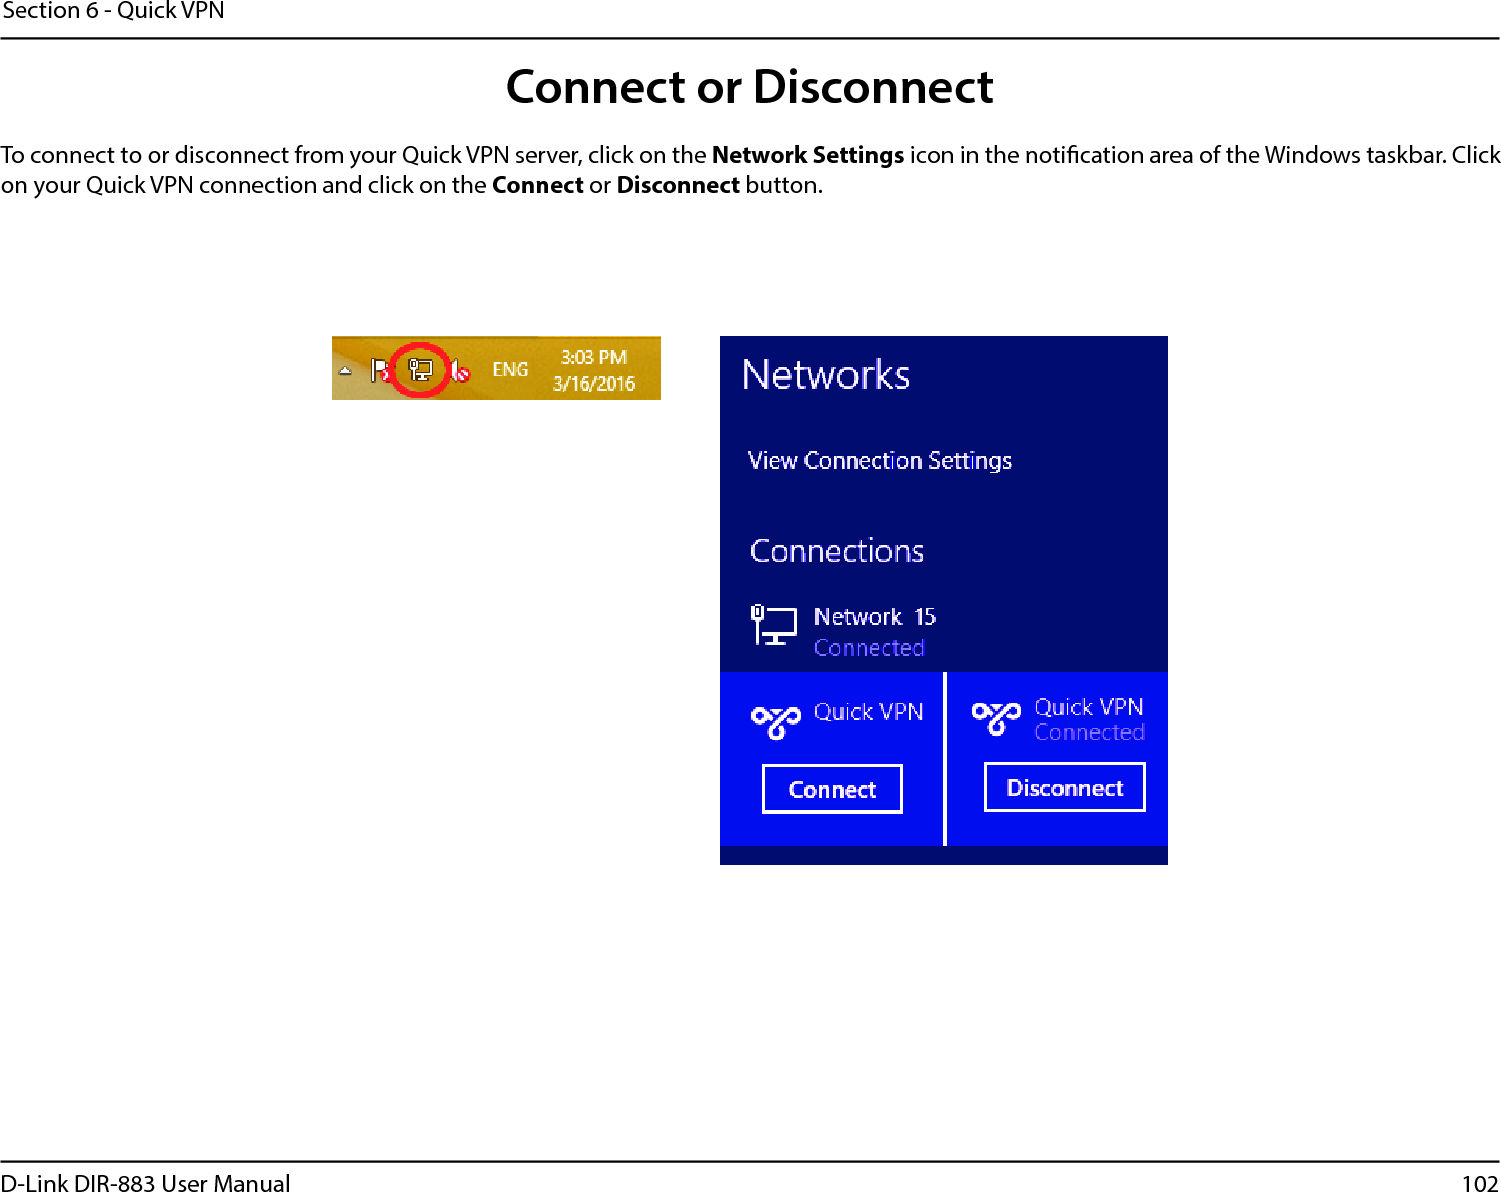 102D-Link DIR-883 User ManualSection 6 - Quick VPNConnect or DisconnectTo connect to or disconnect from your Quick VPN server, click on the Network Settings icon in the notication area of the Windows taskbar. Clickon your Quick VPN connection and click on the Connect or Disconnect button.